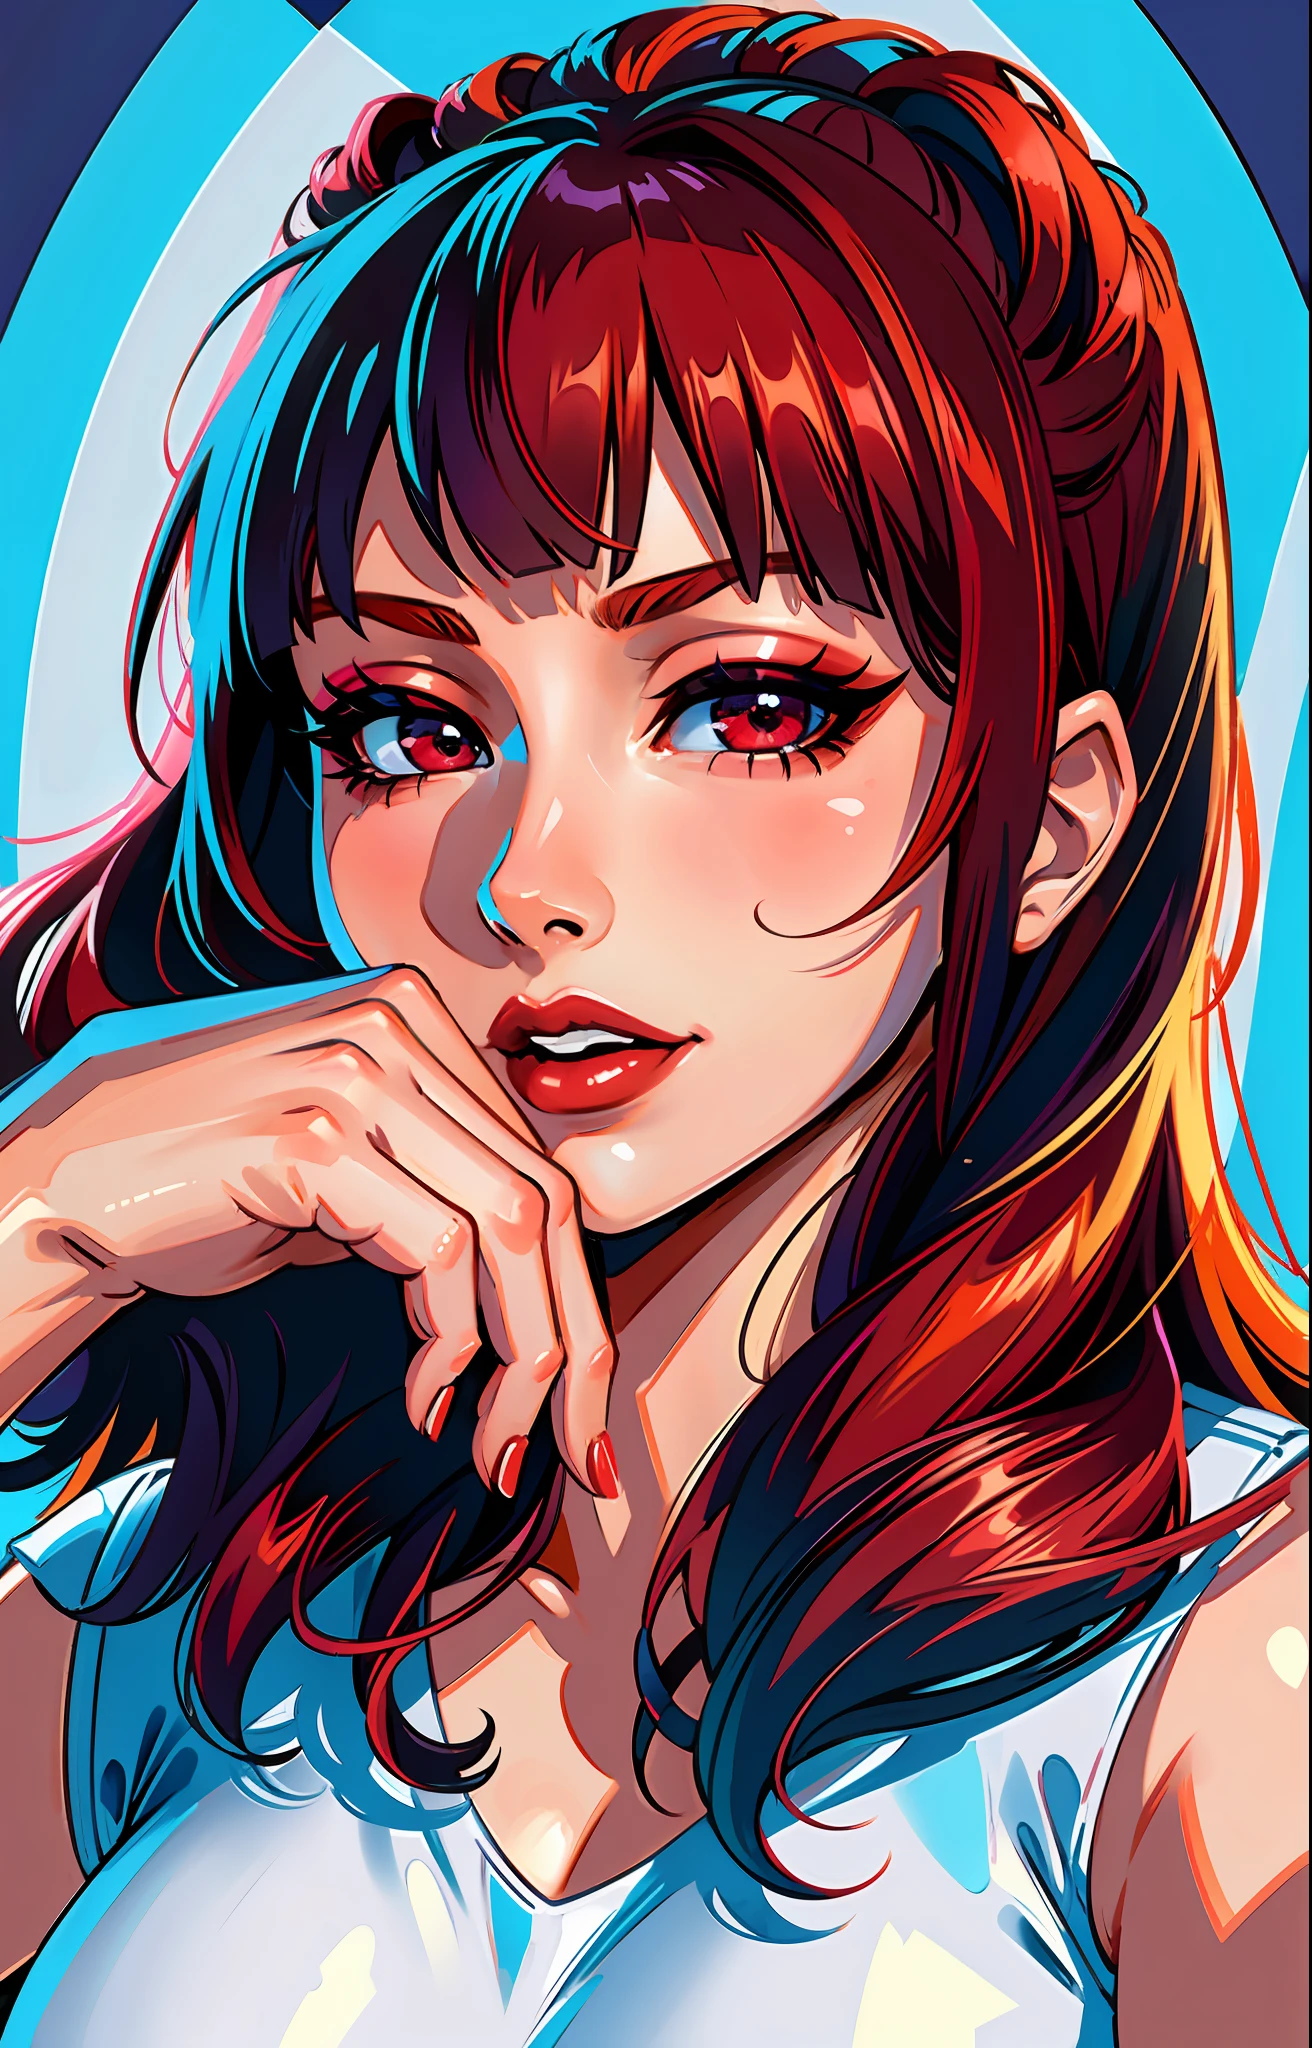 (masterpiece),(best quality:1.0), (ultra highres:1.0), detailed illustration, 8k, anime, 1girl, beautiful anime girl, wearing a red top, pretty face, detailed face, beautiful eyes, detailed eyes, dark red eyes, bright red lips, red lipstick, beautiful stylish hair, highlights in hair, bangs anime style, best quality, vibrant